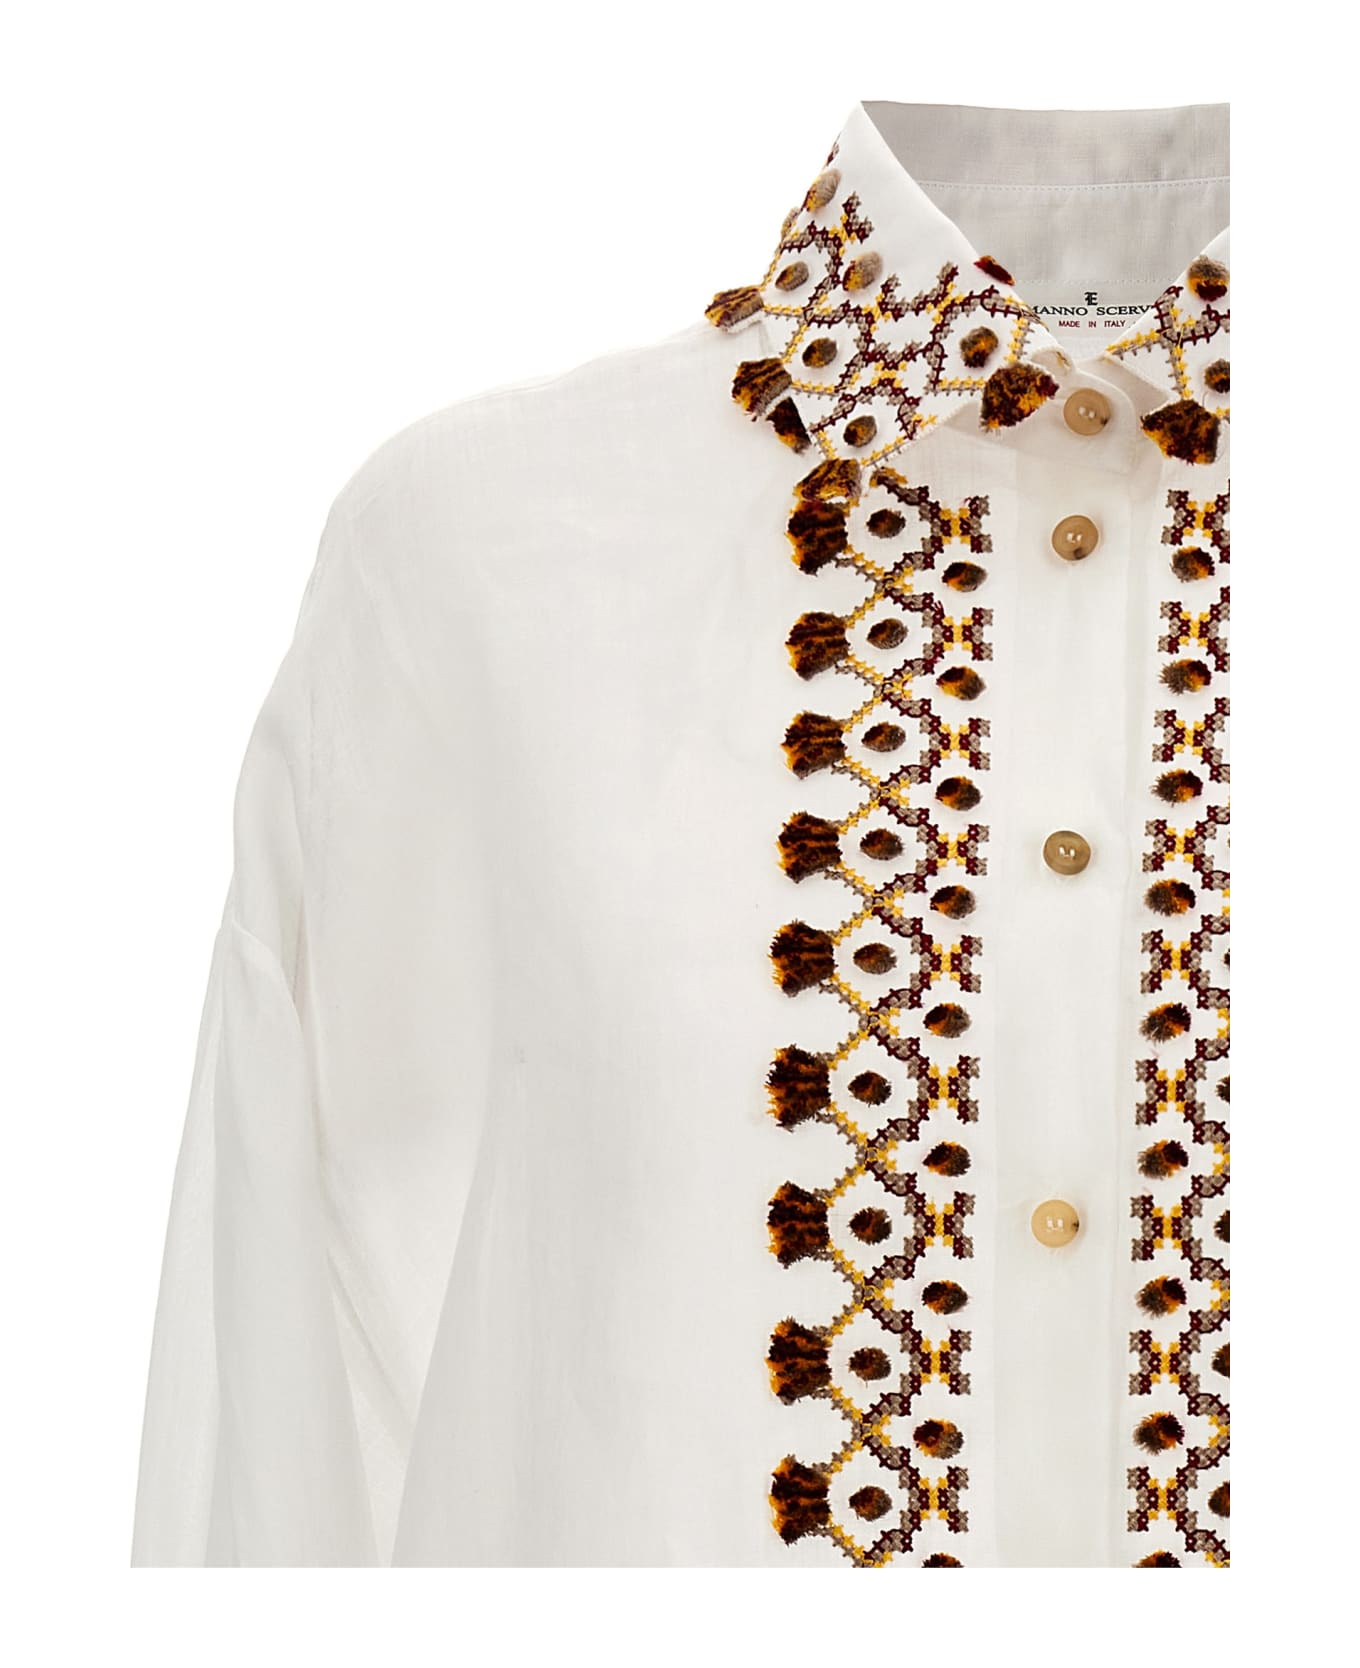 Ermanno Scervino Embroidery Shirt - White ブラウス